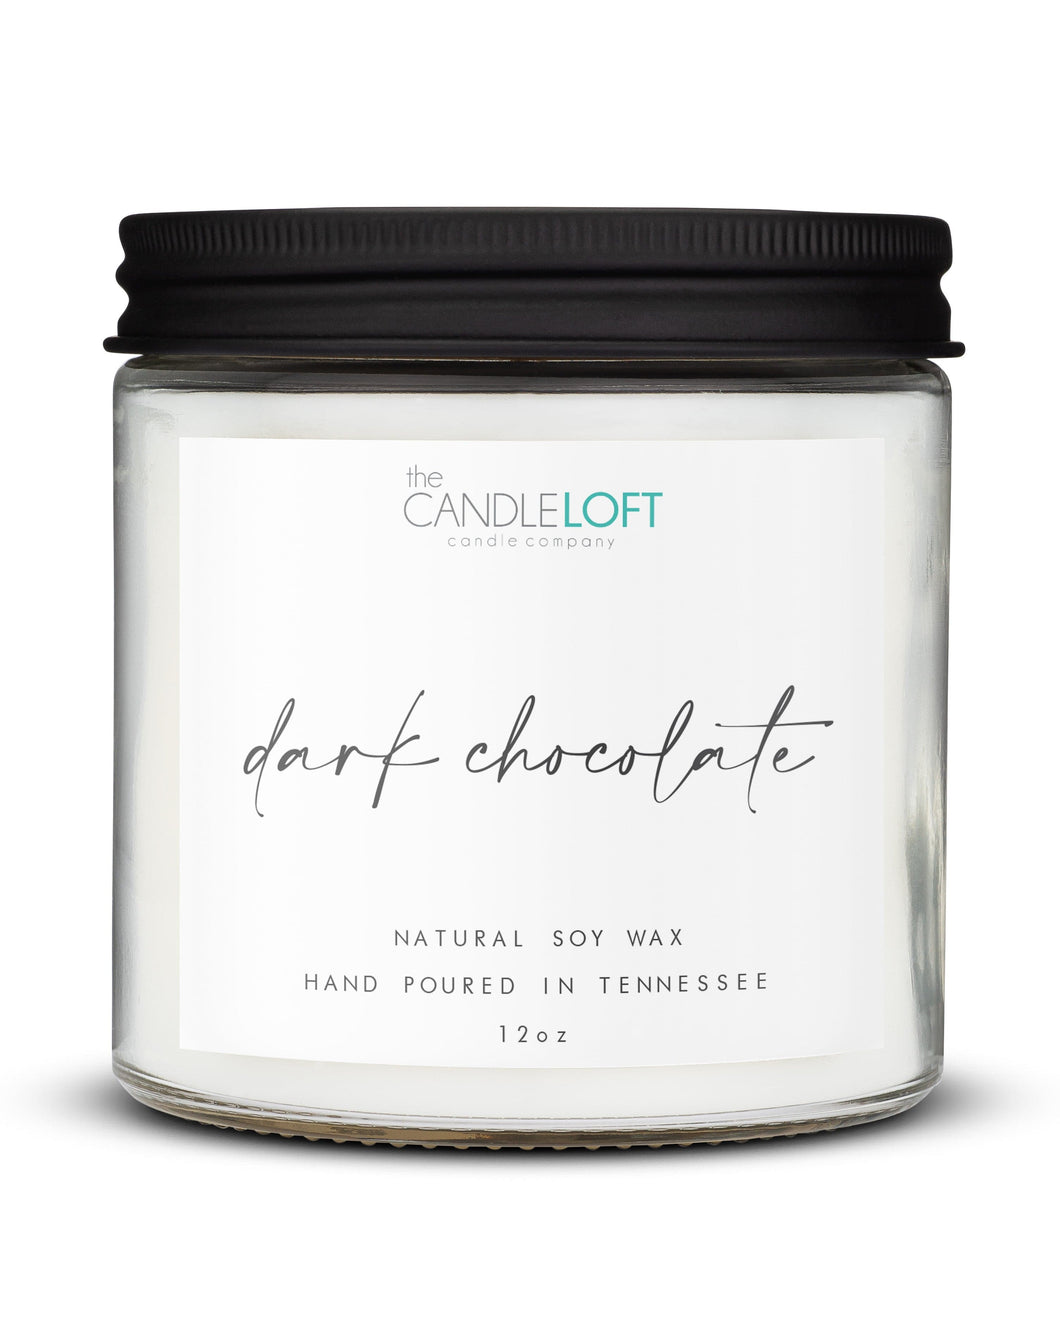 The Candle Loft Candles Signature 12oz Dark Chocolate Candle